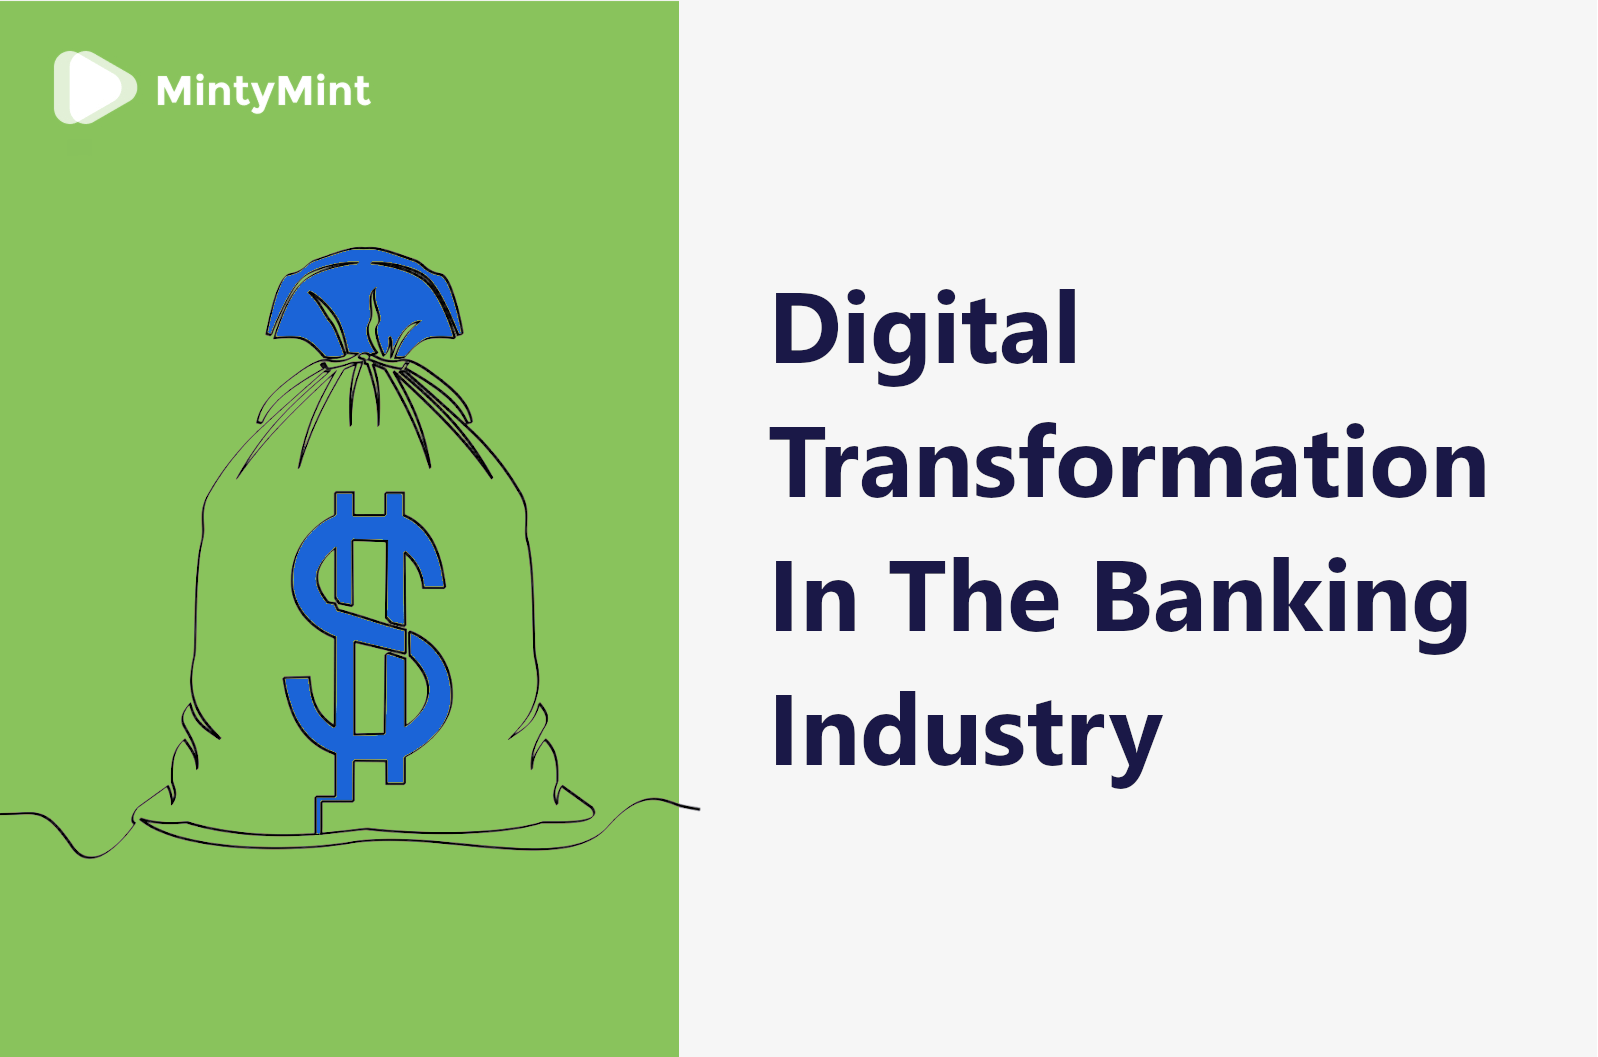 Digital Transformation In The Banking Industry